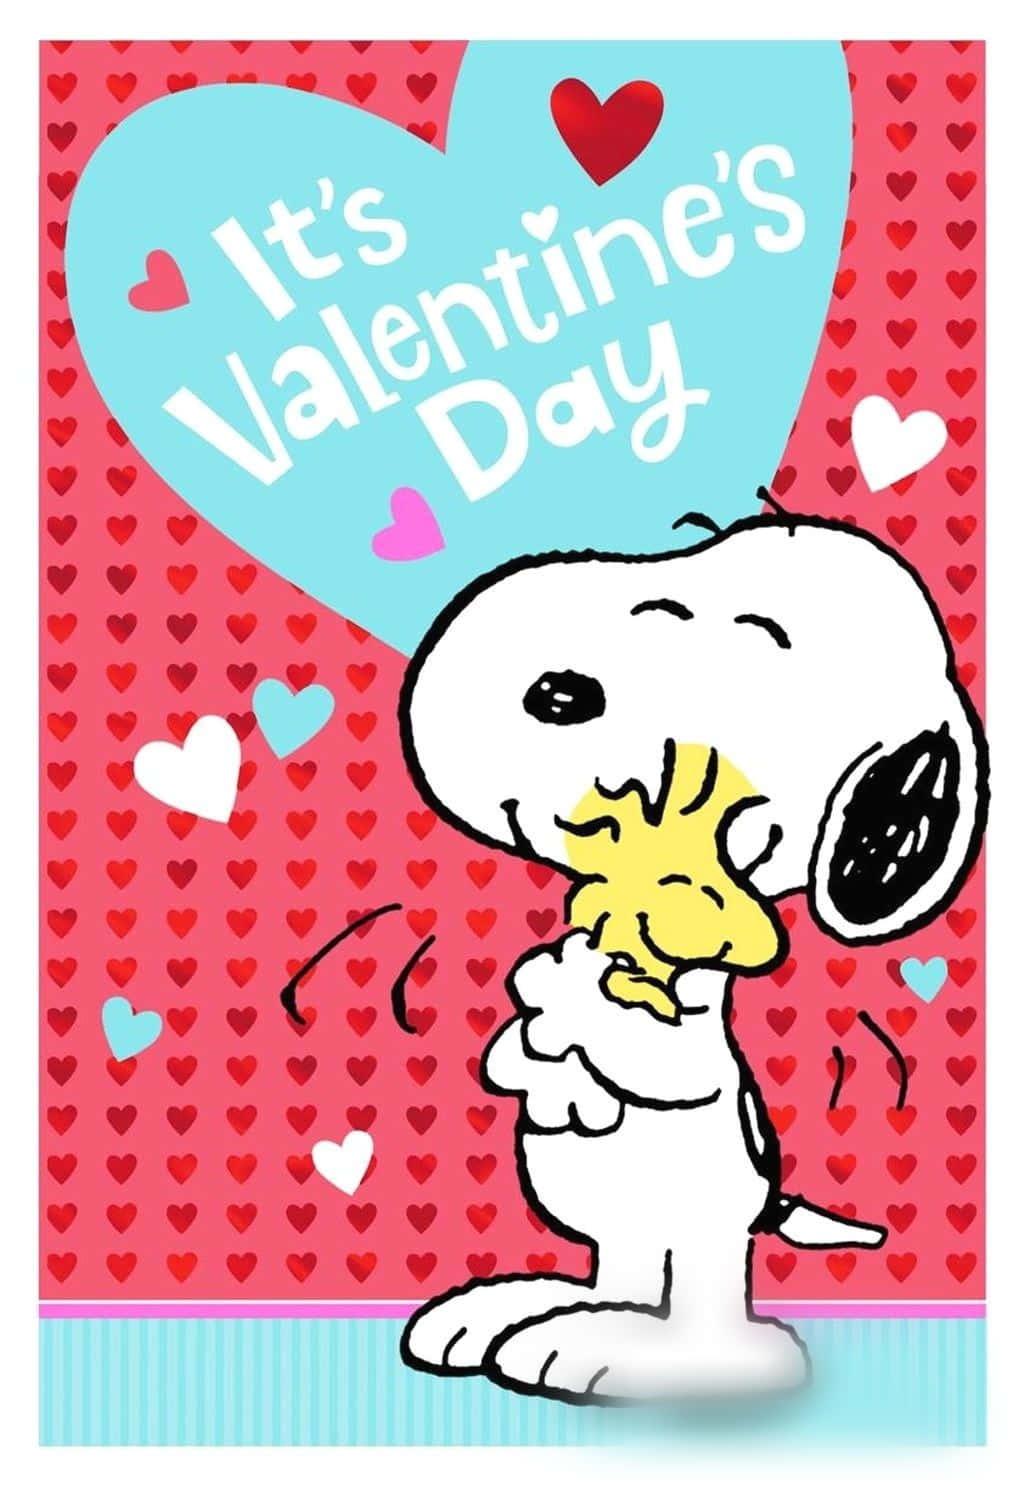 Snoopy And His Dog Are Holding A Heart Shaped Valentine's Day Card